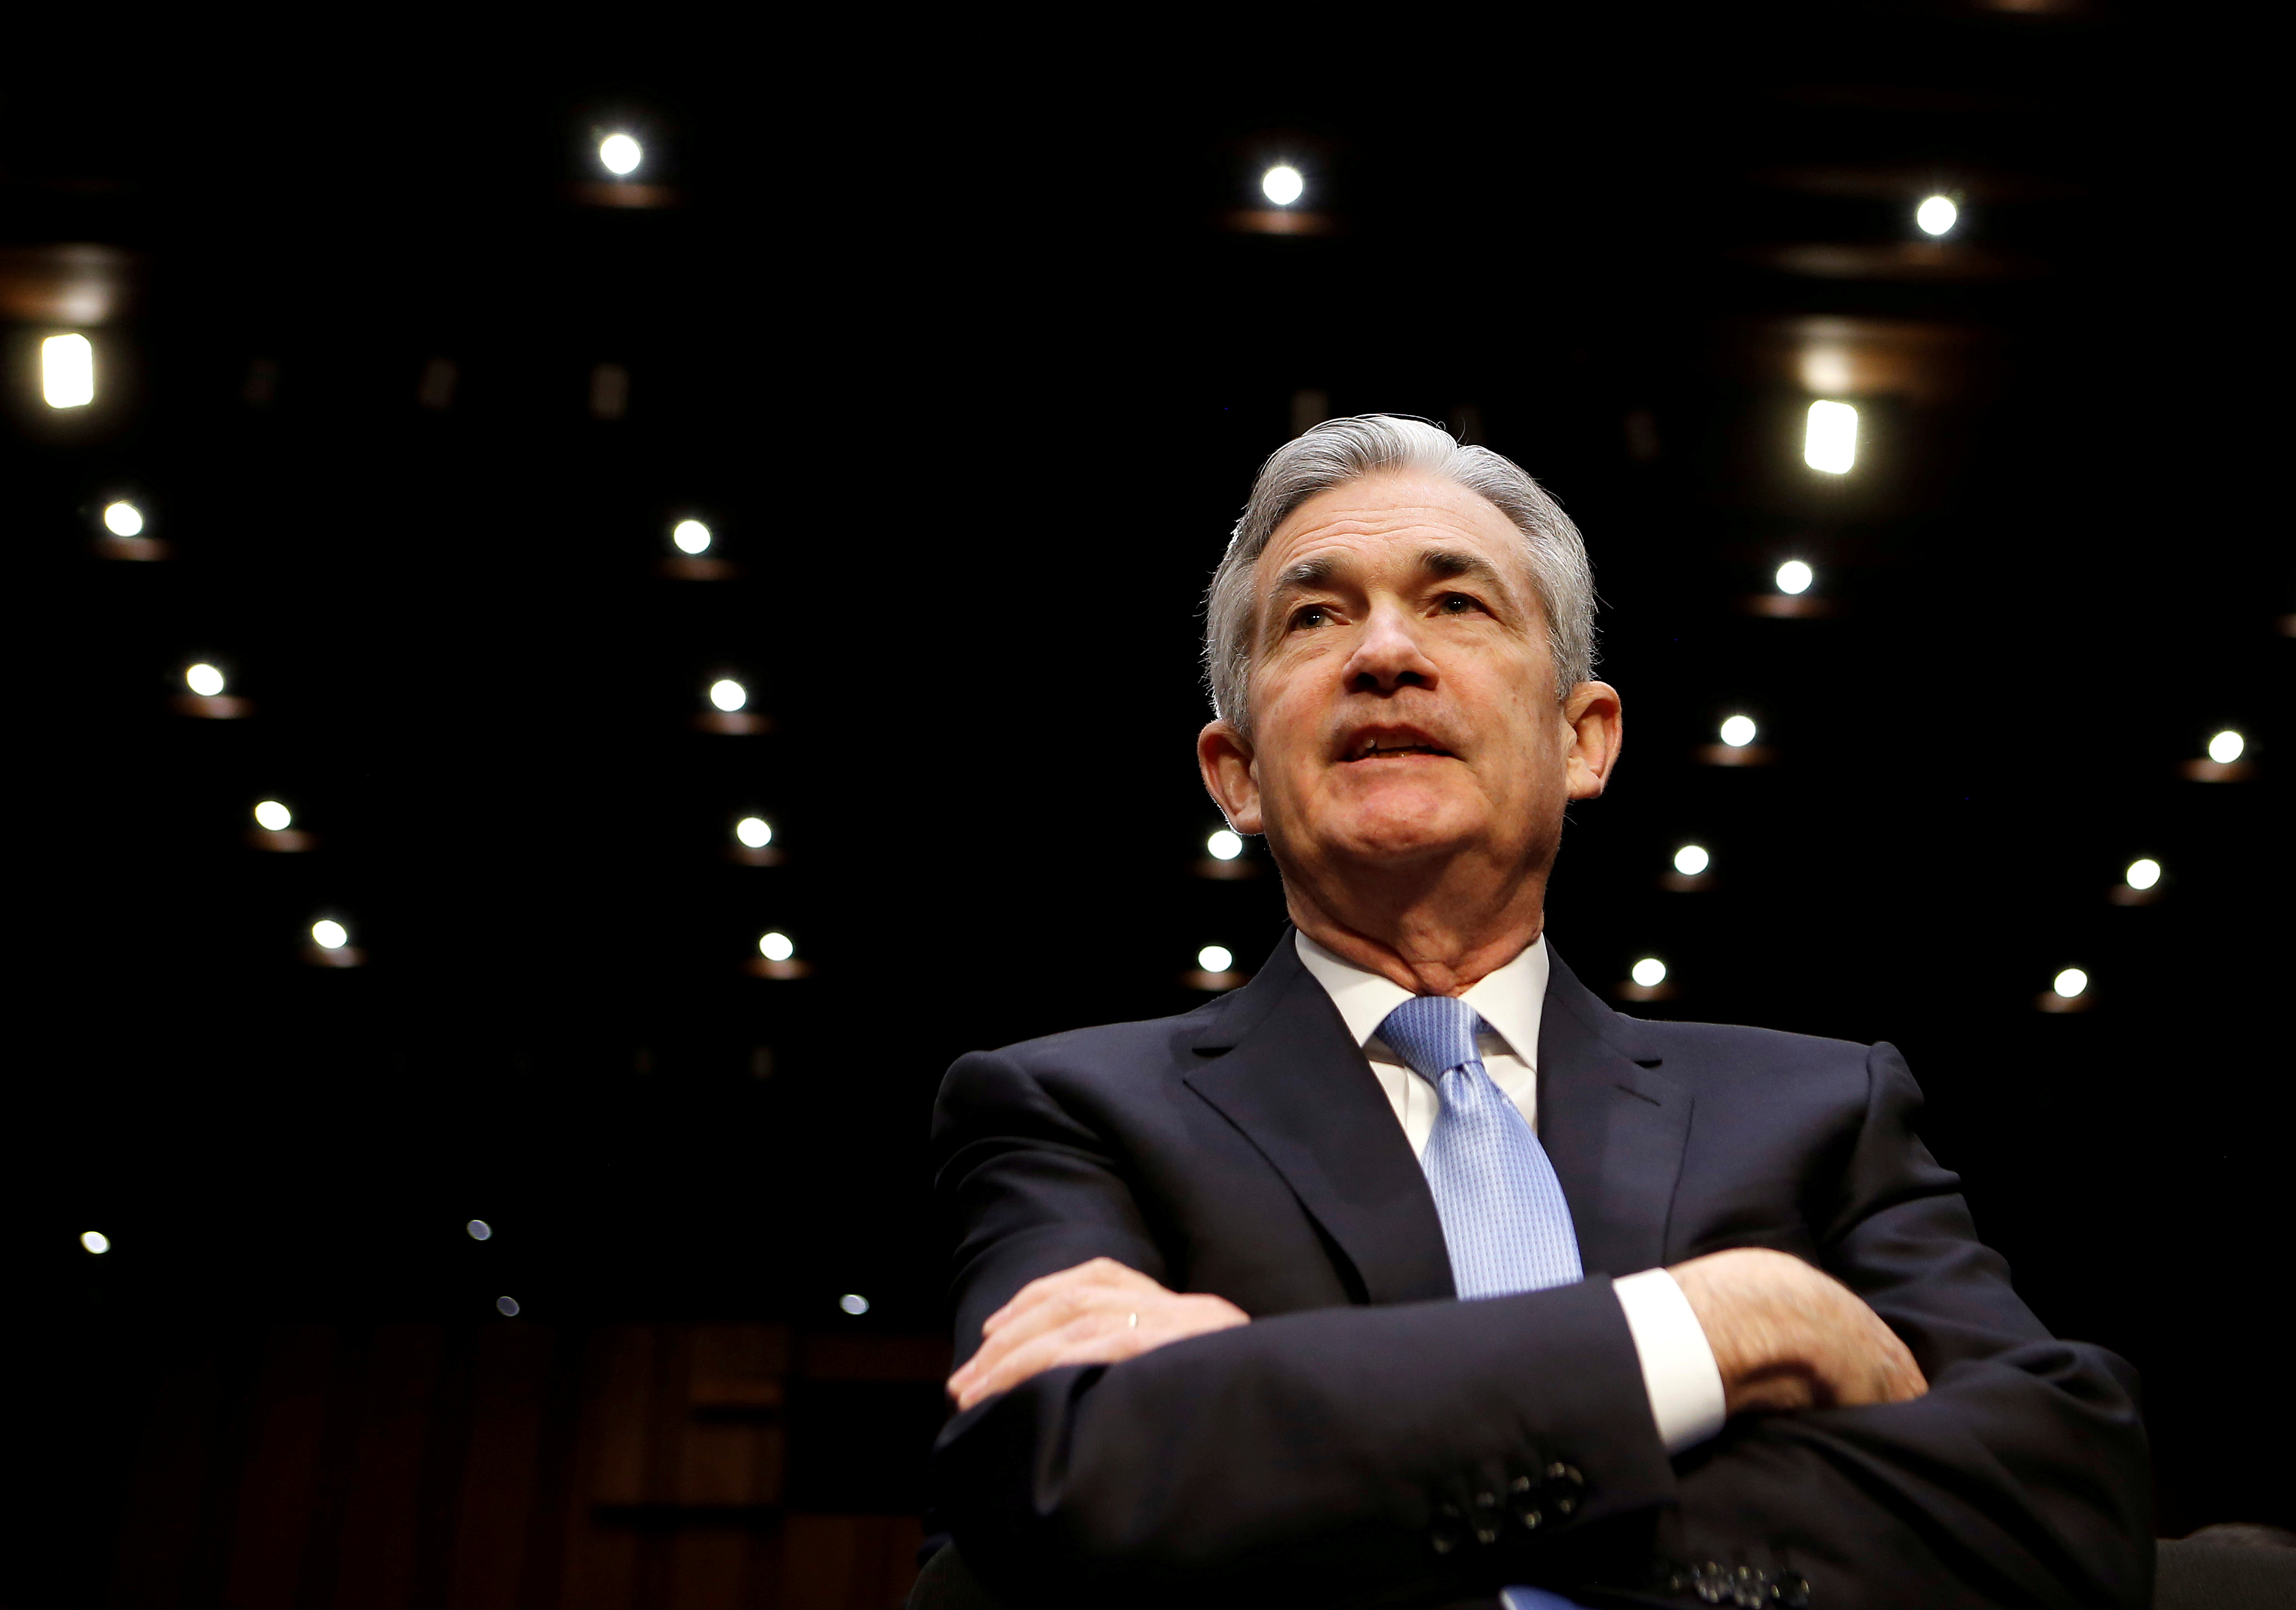 Jerome Powell waits to testify before the Senate Banking, Housing and Urban Affairs Committee on his nomination to become chairman of the U.S. Federal Reserve in Washington, U.S., November 28, 2017. REUTERS/Joshua Roberts